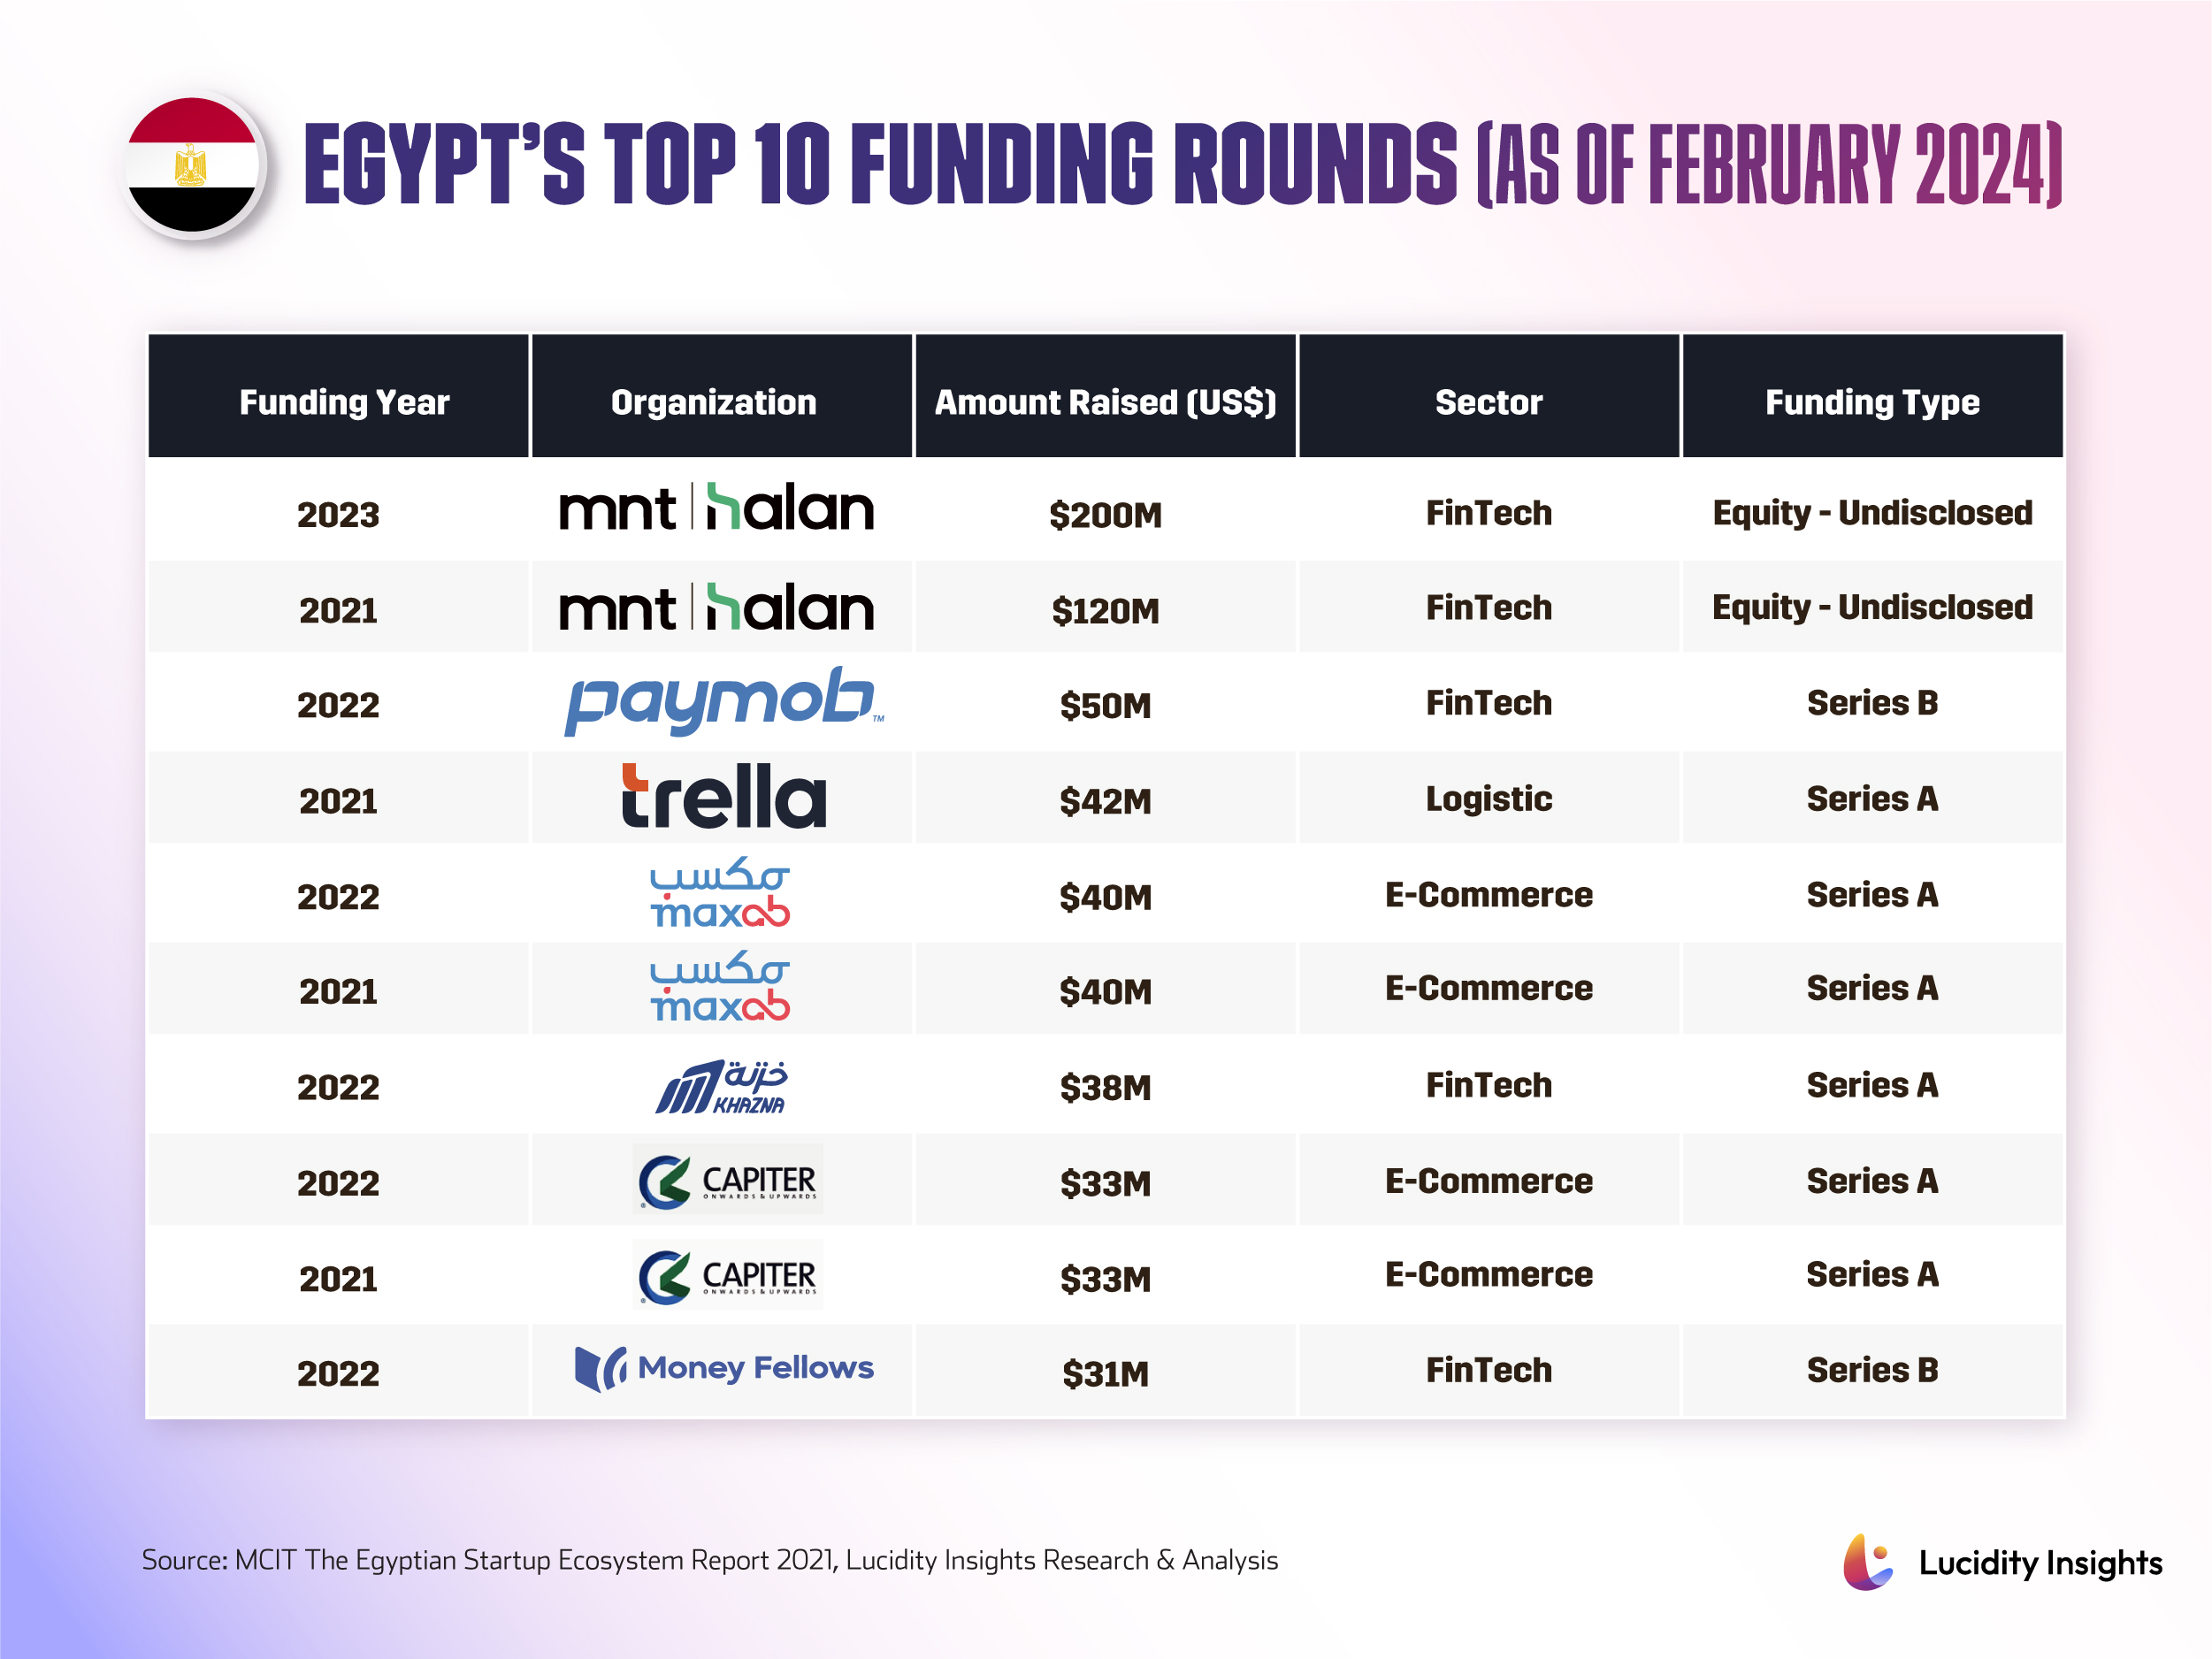 Egypt’s Top 10 Funding Rounds to Date (As of February 2024)